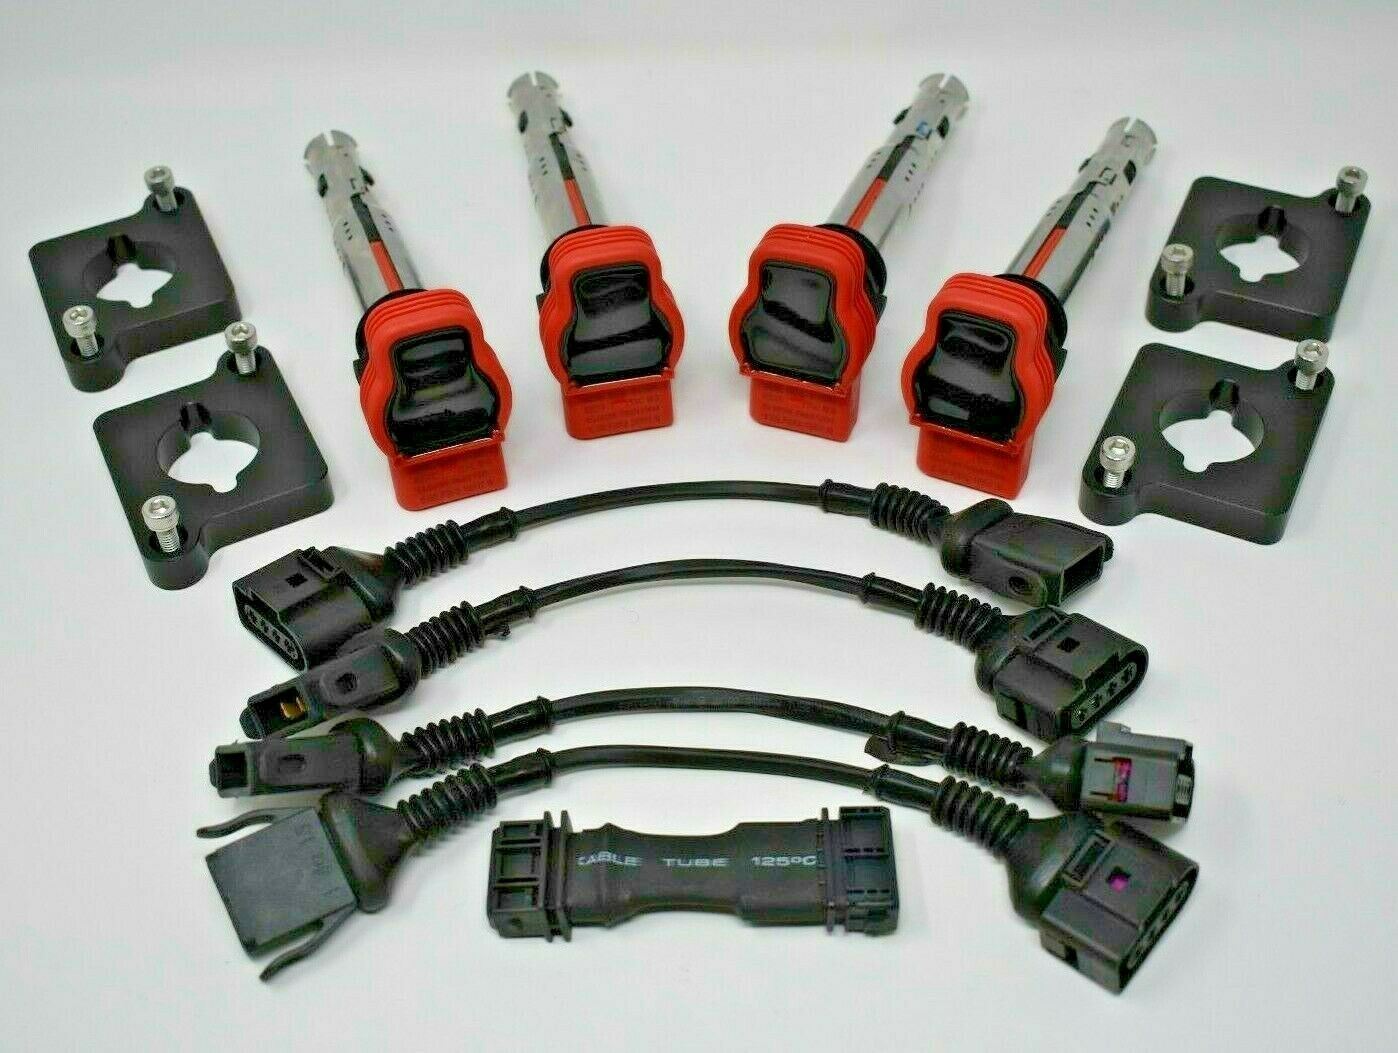 Audi 2.0T Coil Conversion ICM Bypass Kit R8 Coilpack Plates (97-99.5 1.8T) B5 A4